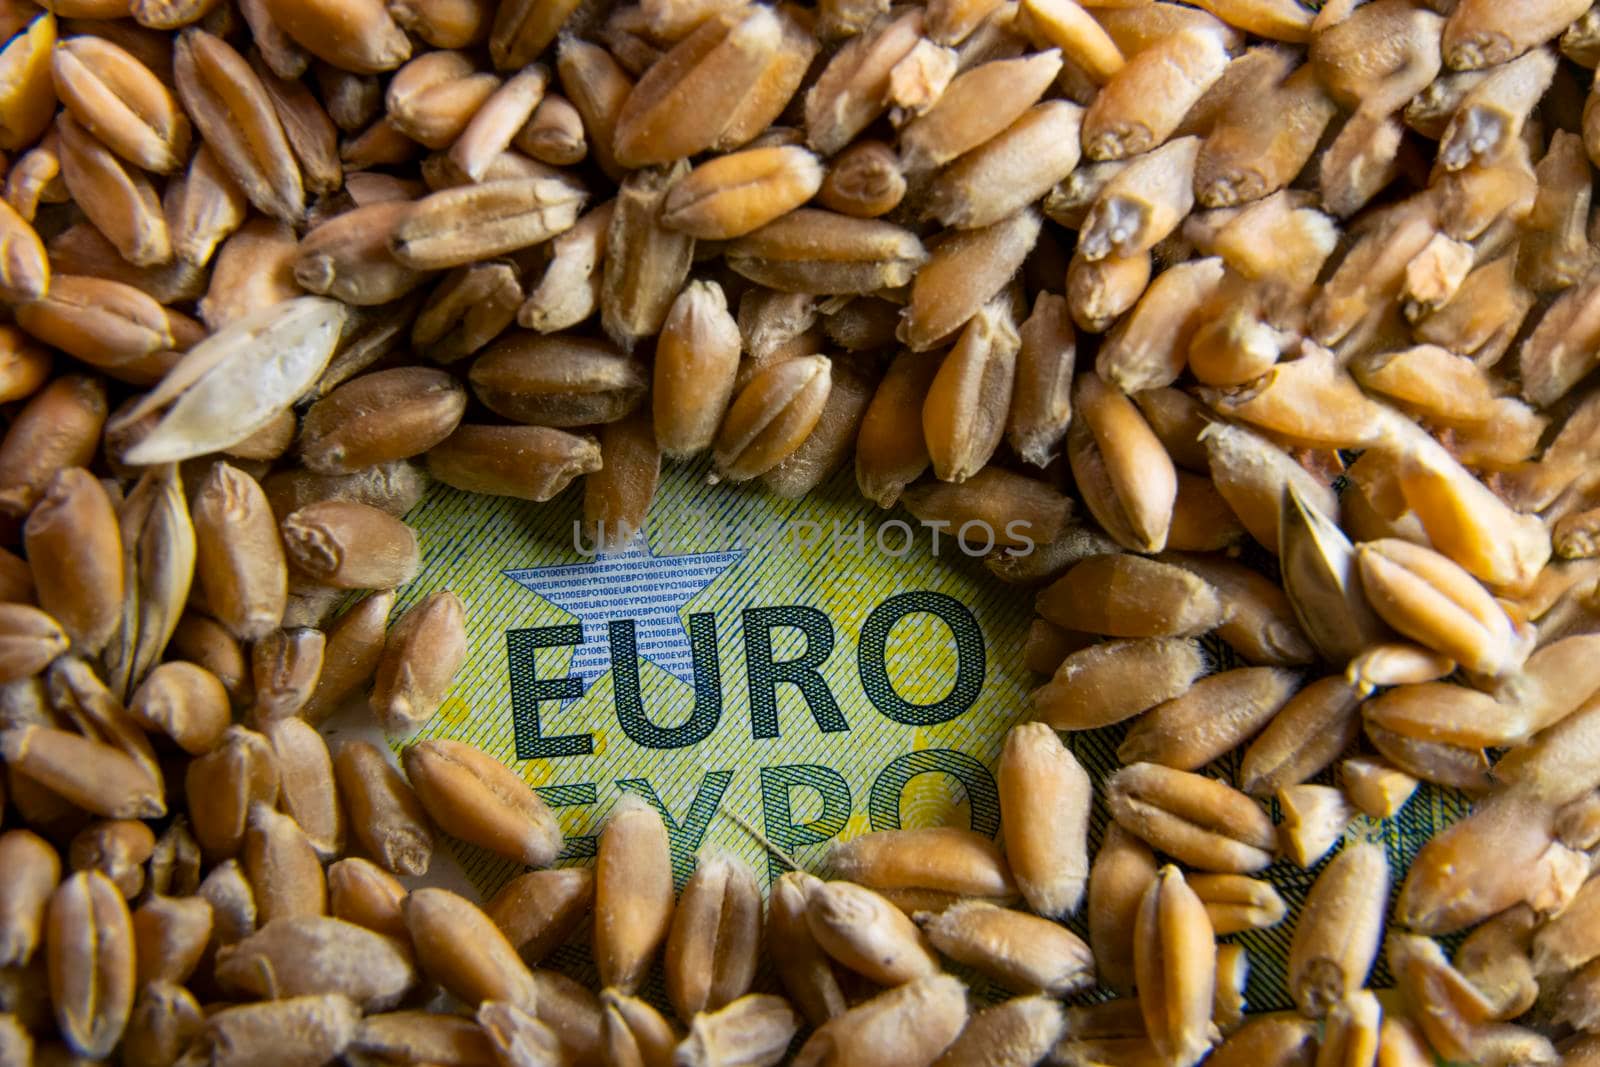 the euro inscription on the banknote which is visible from under the wheat grain close-up